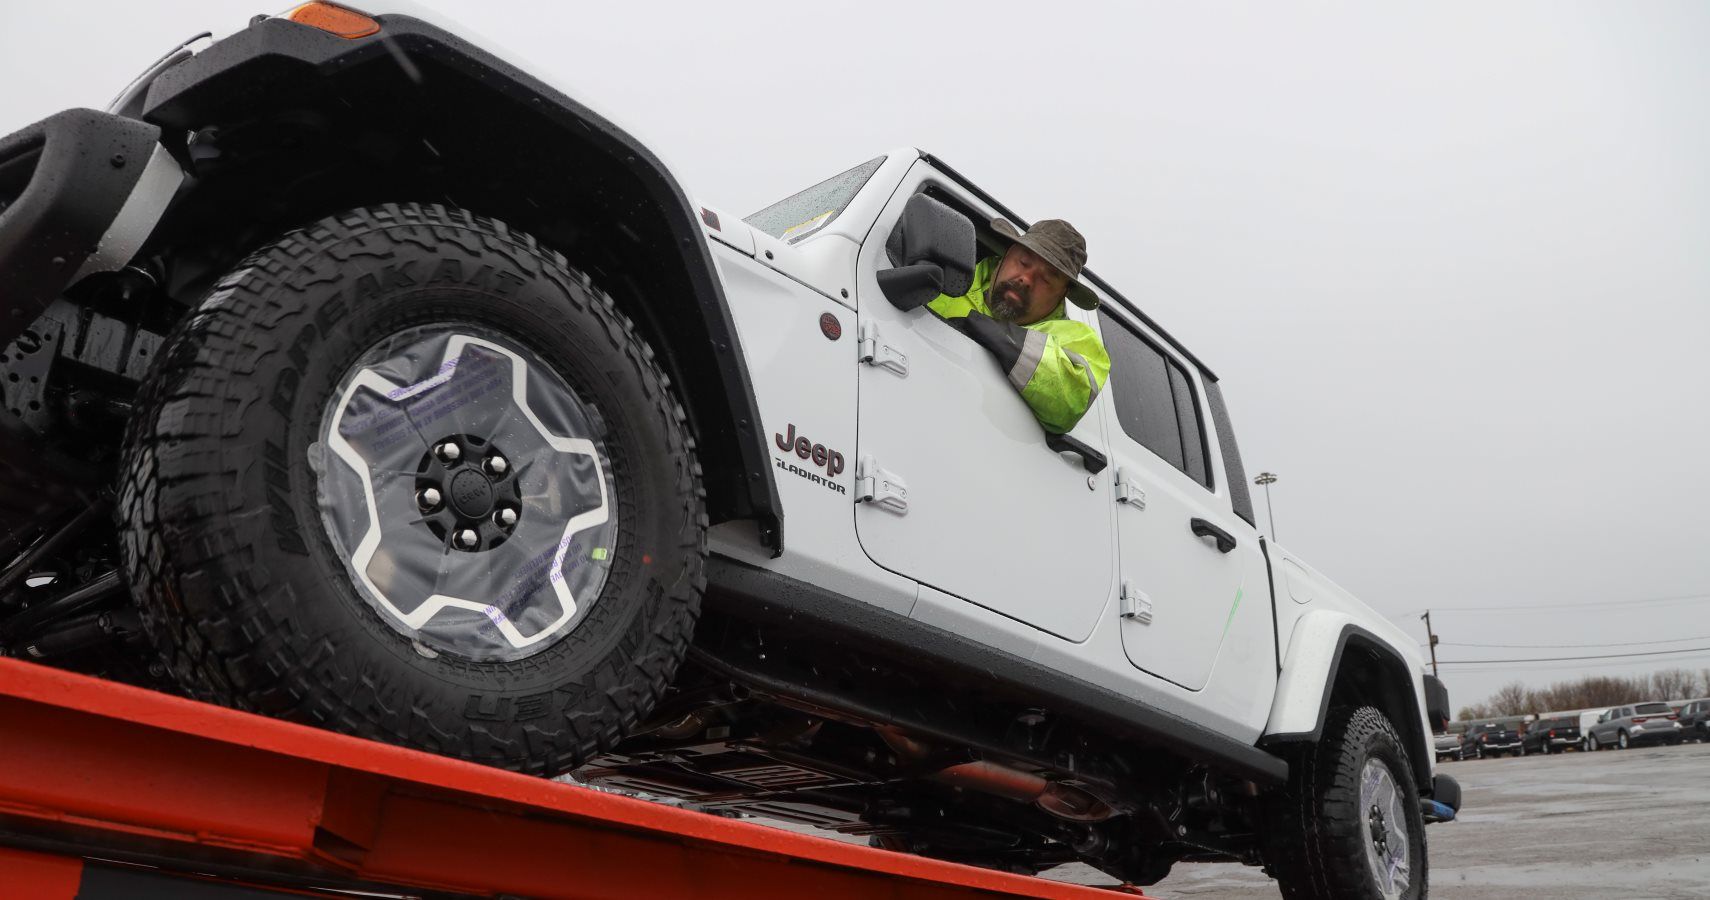 It’s Almost Here! 2020 Jeep Gladiator Is Arriving At Dealerships